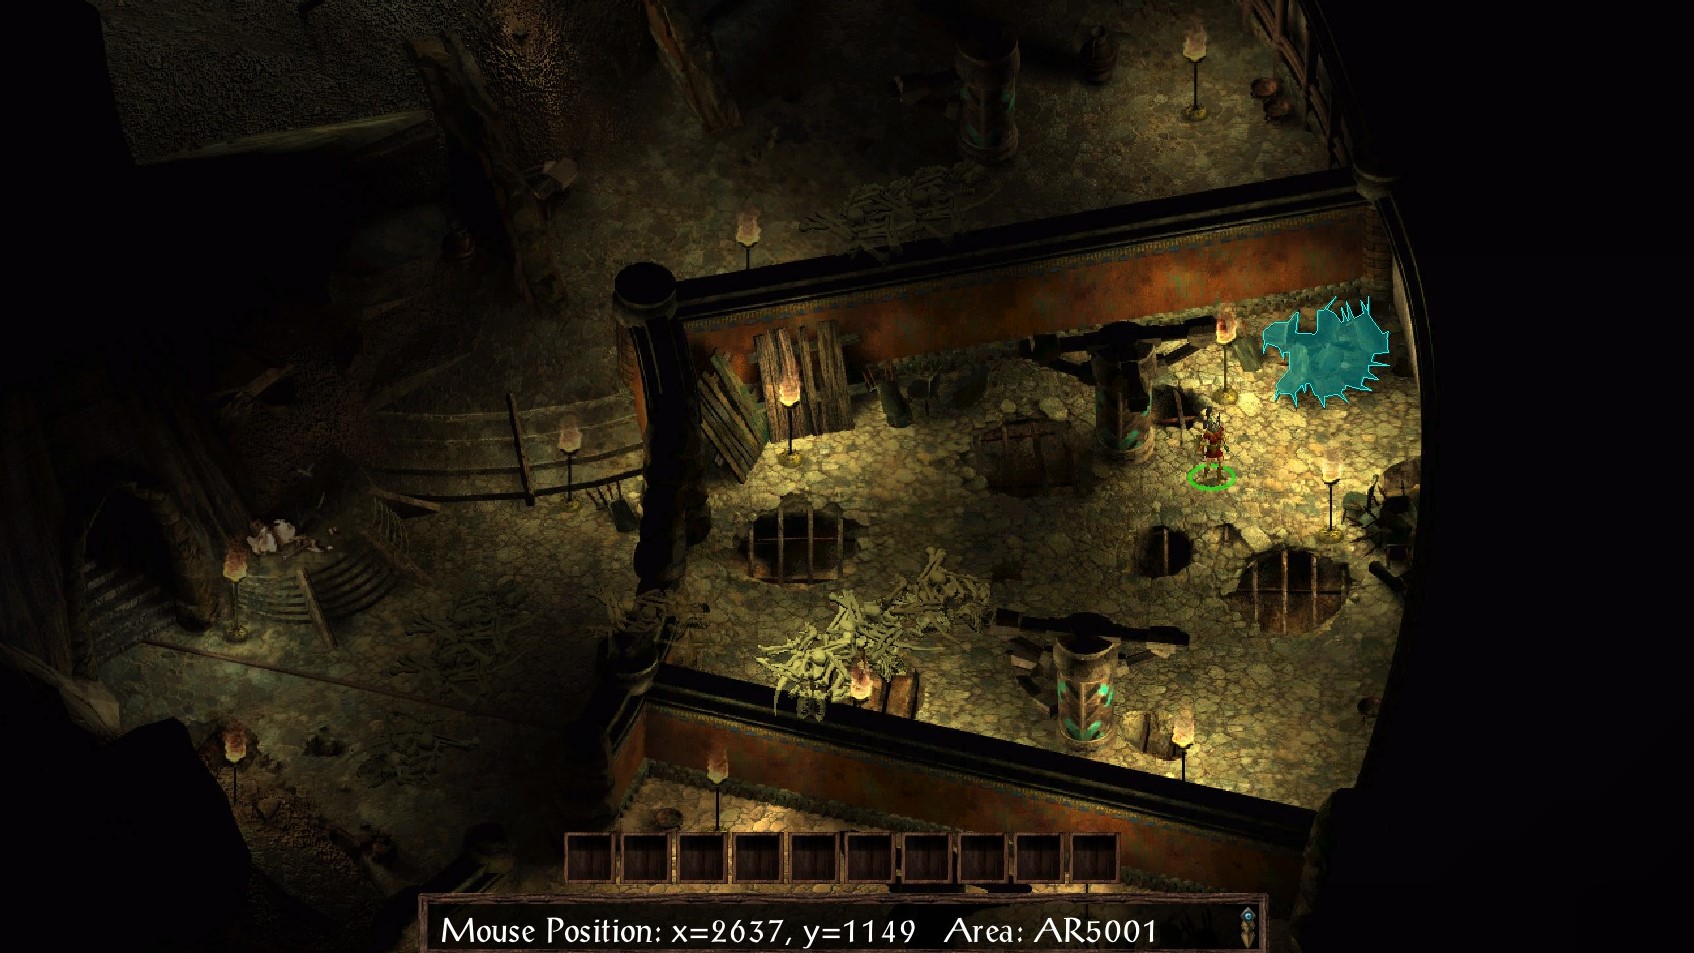 Icewind Dale: Enhanced Edition - Guide includes a list of random treasures - Severed Hand - levels 1 & 2 - EB5ACDB